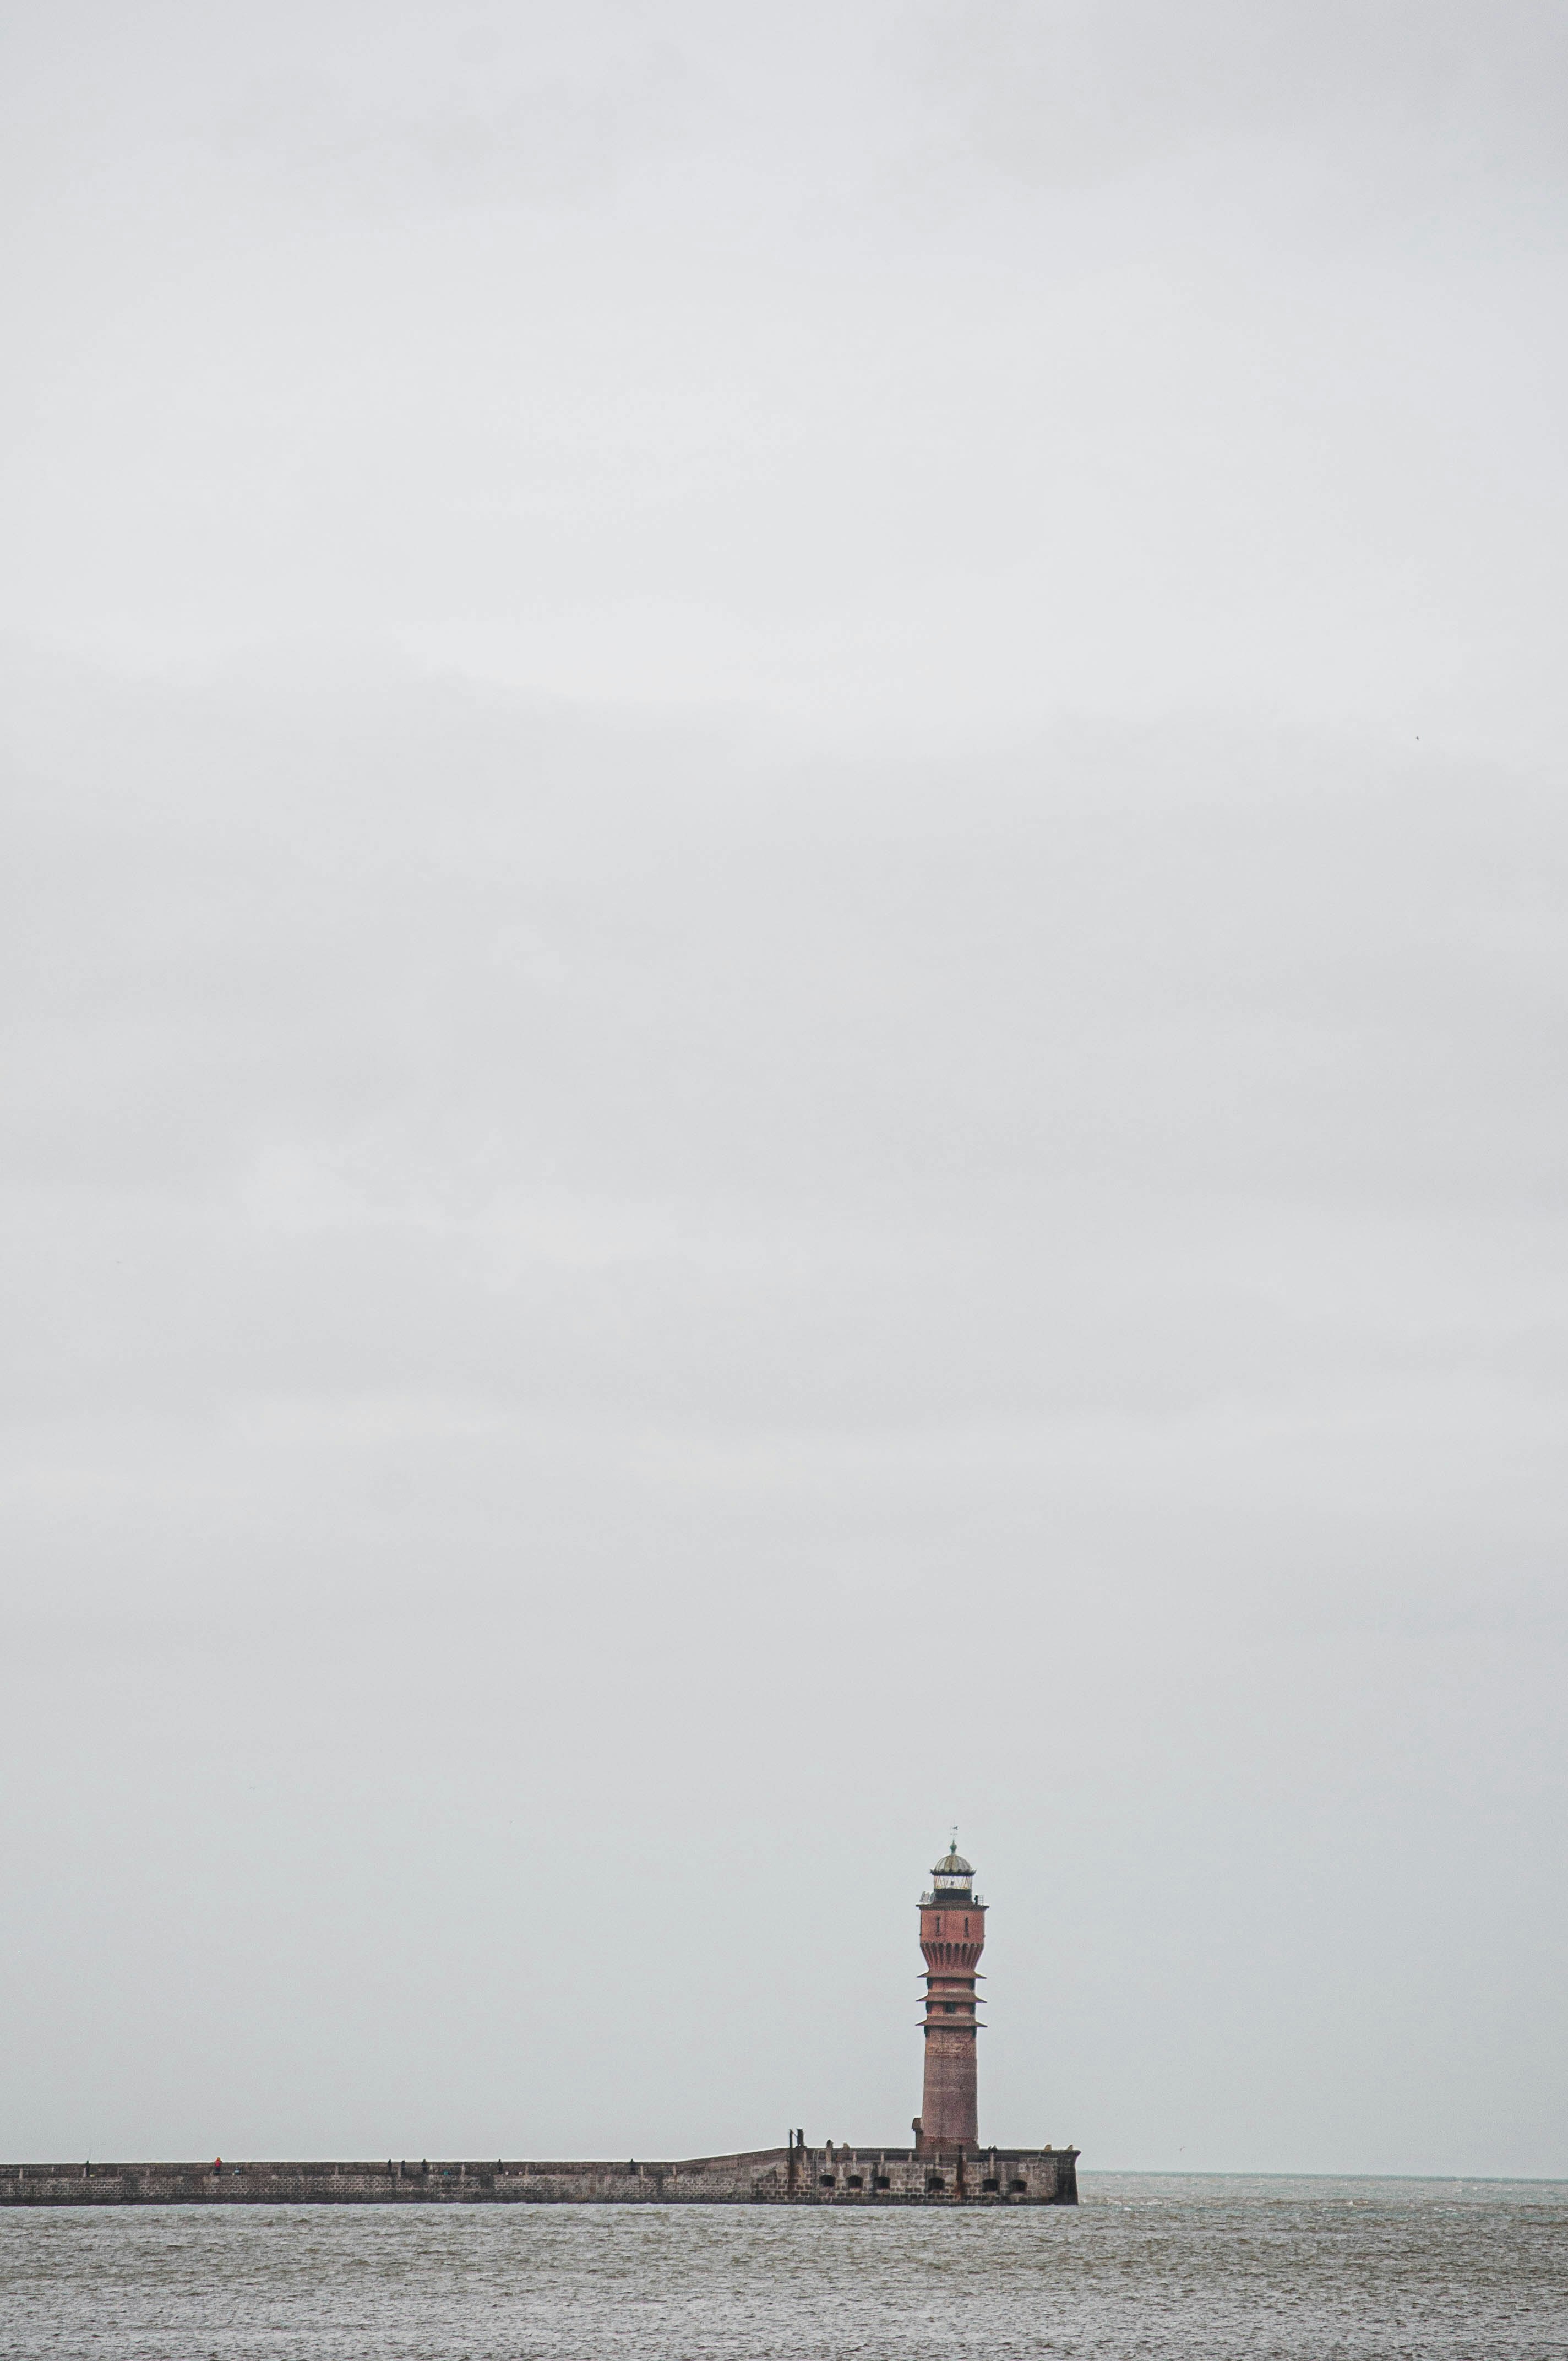 red and white lighthouse under white sky